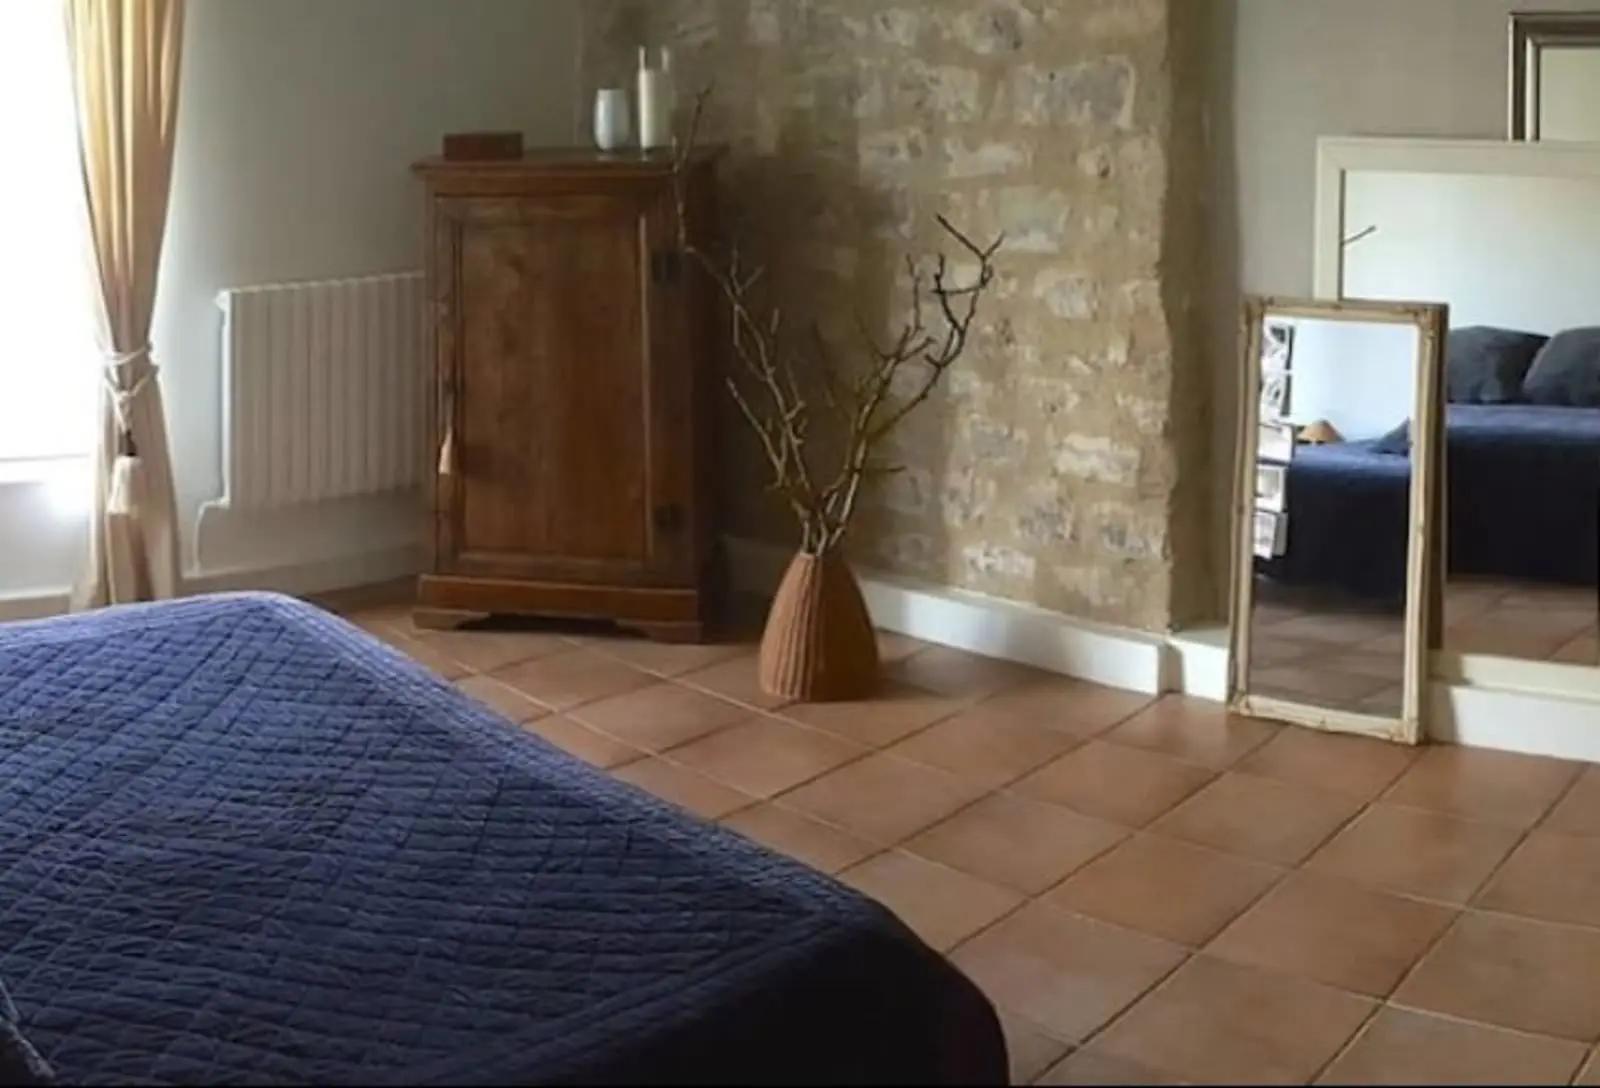 Bedroom in A la maison', a 30-minute drive from Paris - 4